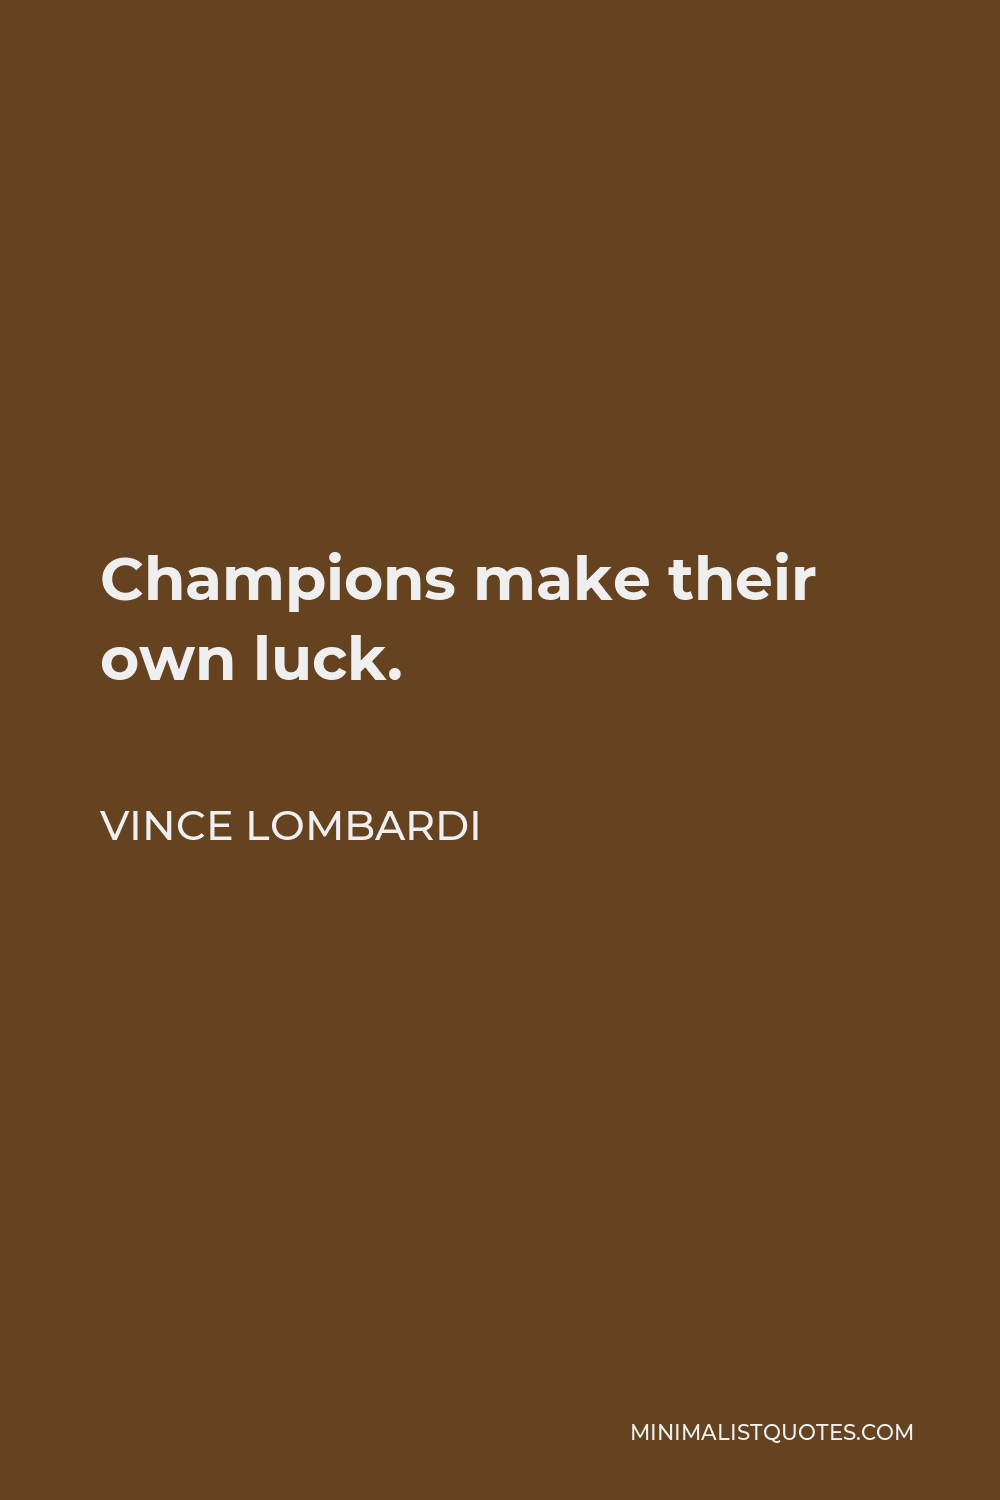 Vince Lombardi Quote - Champions make their own luck.